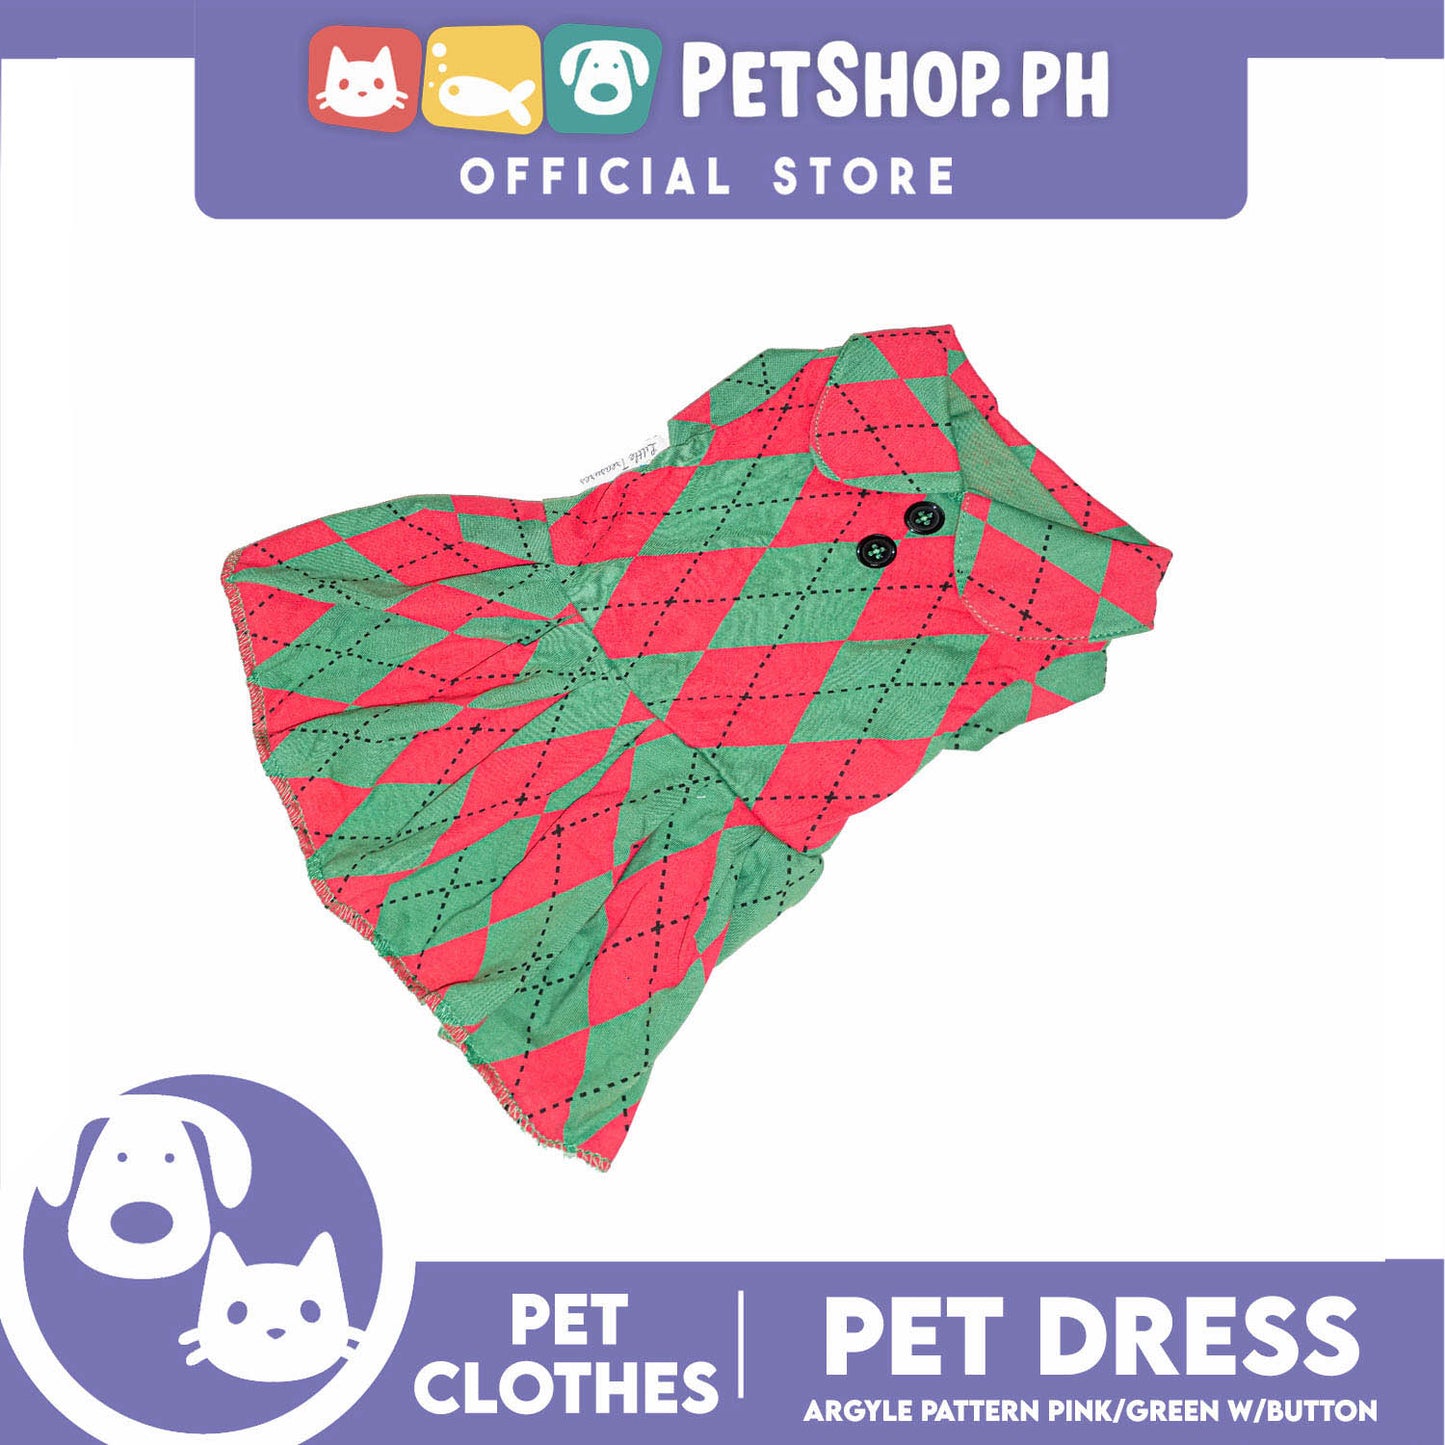 Pet Dress Argyle Pink/Green with Button Dress (Medium) Perfect Fit for Dogs and Cats